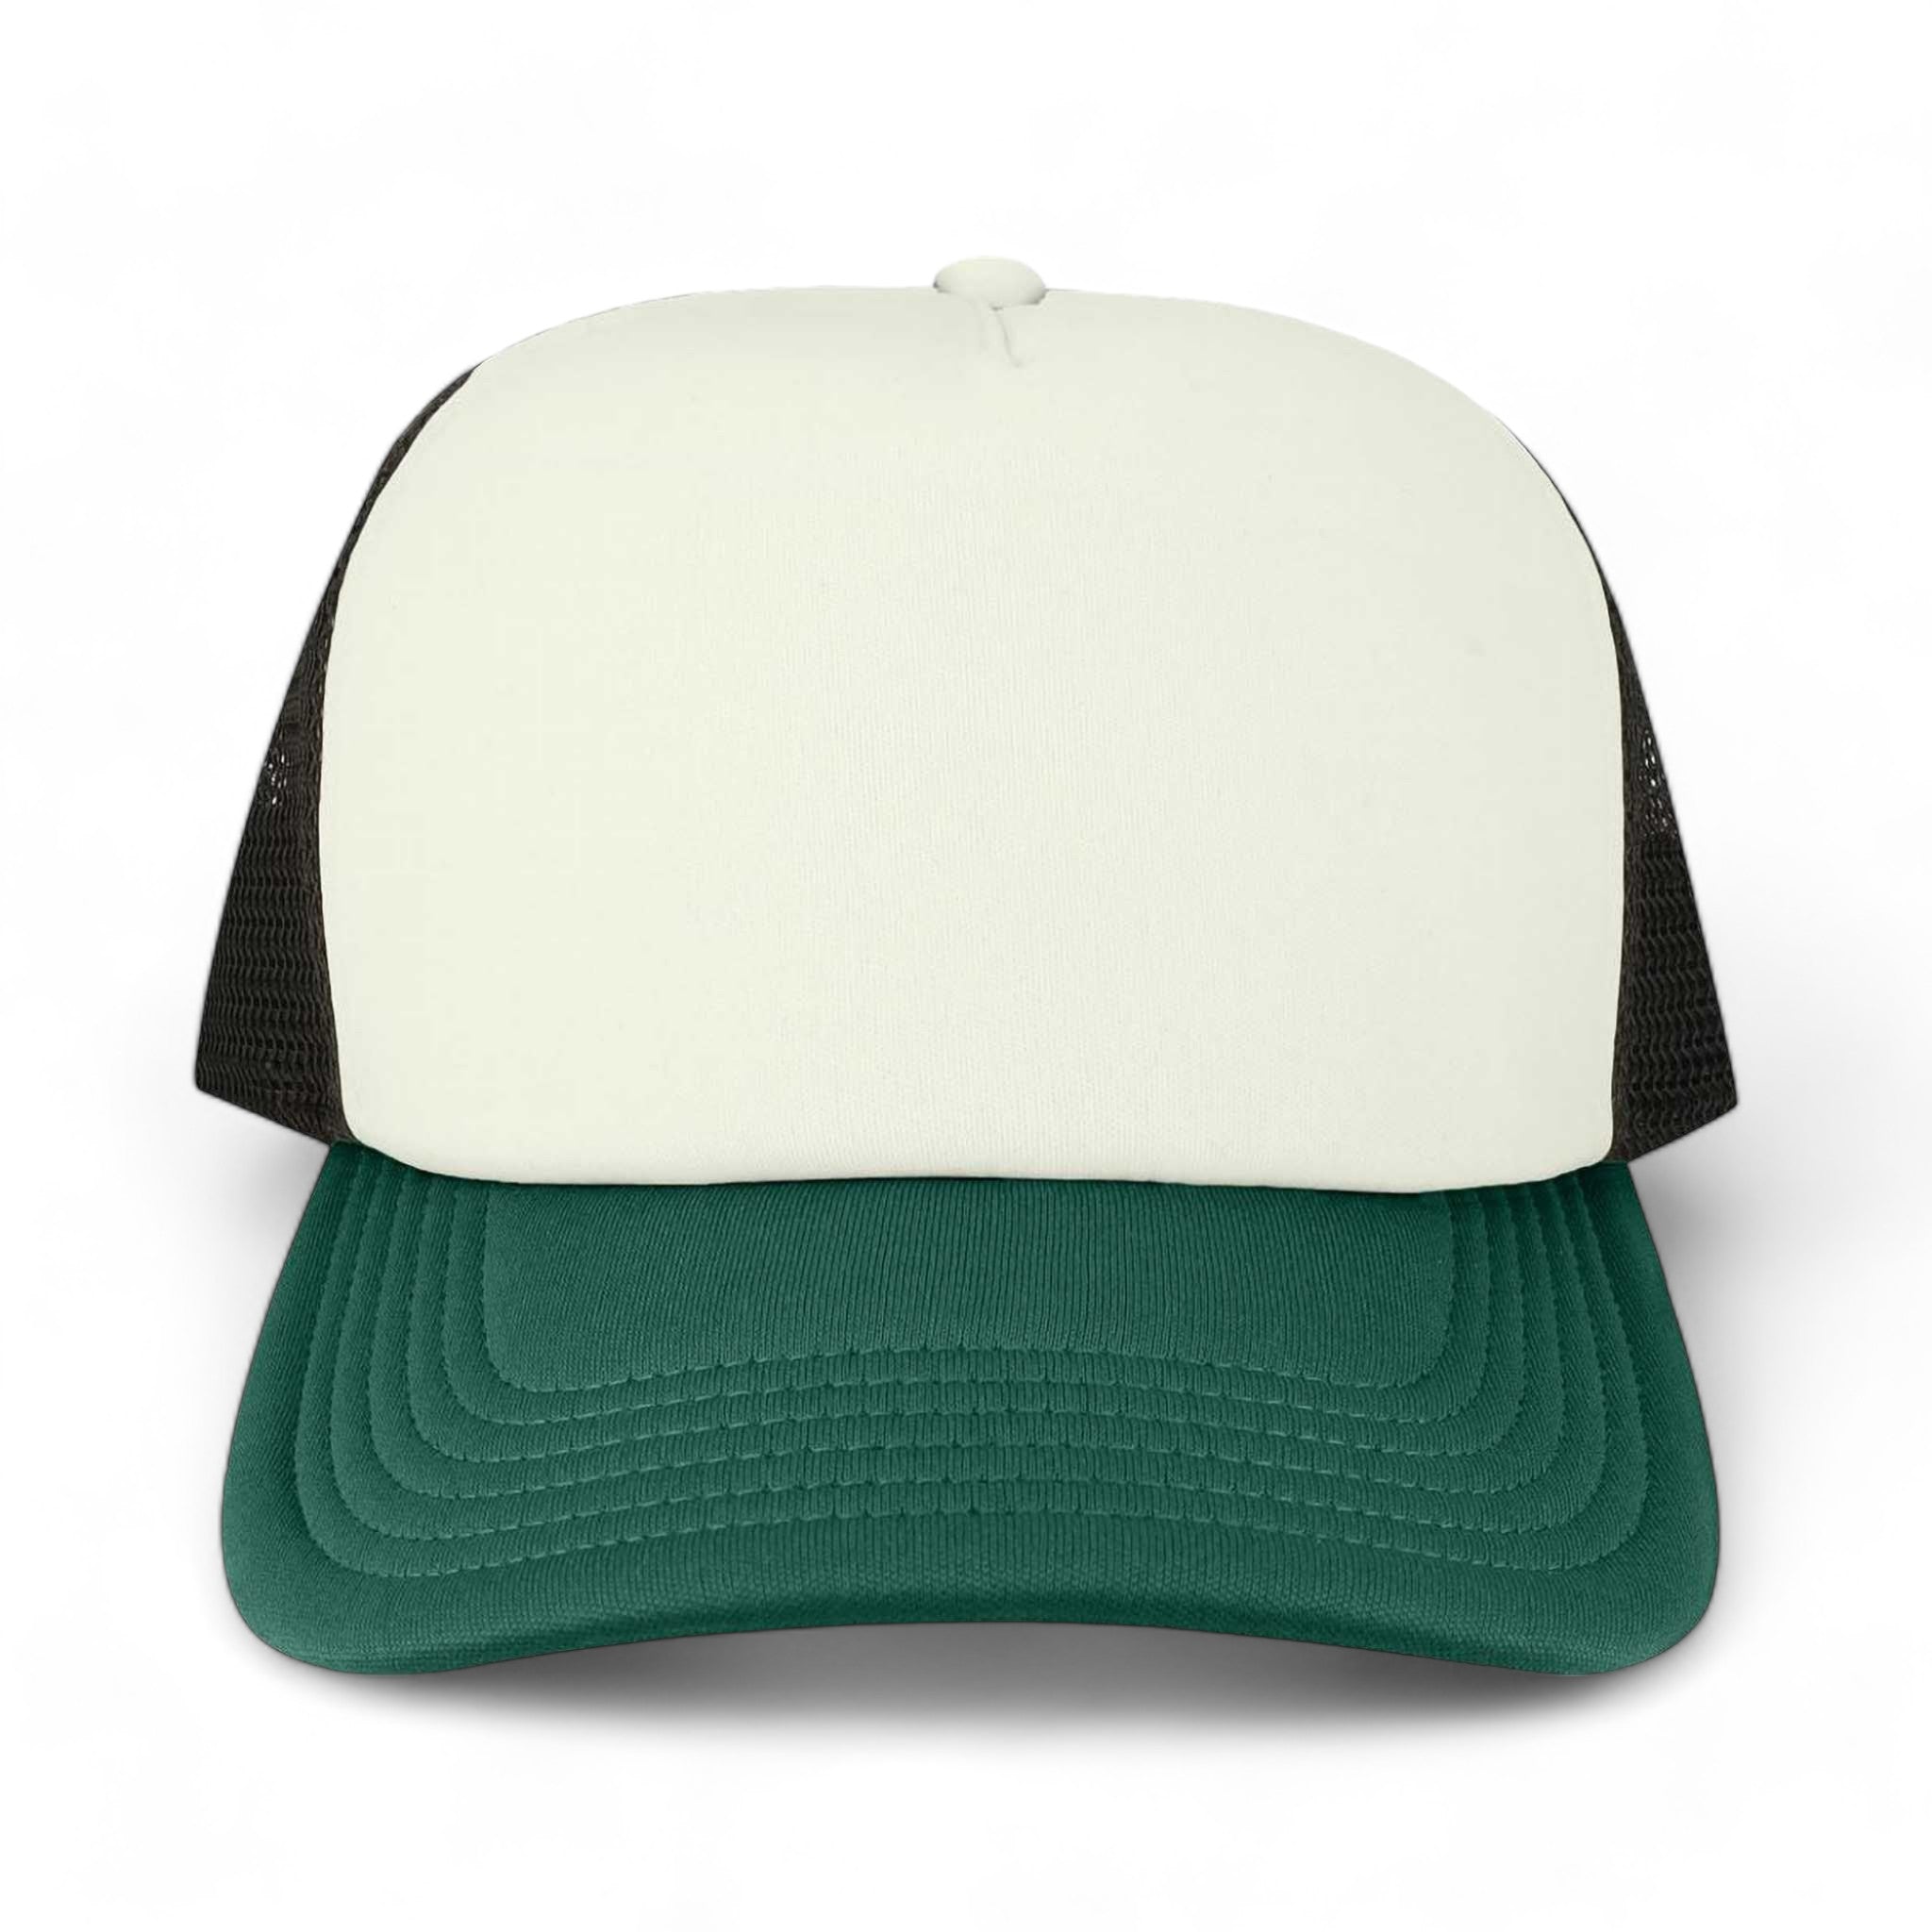 Front view of LEGACY LTA custom hat in cream, green and black